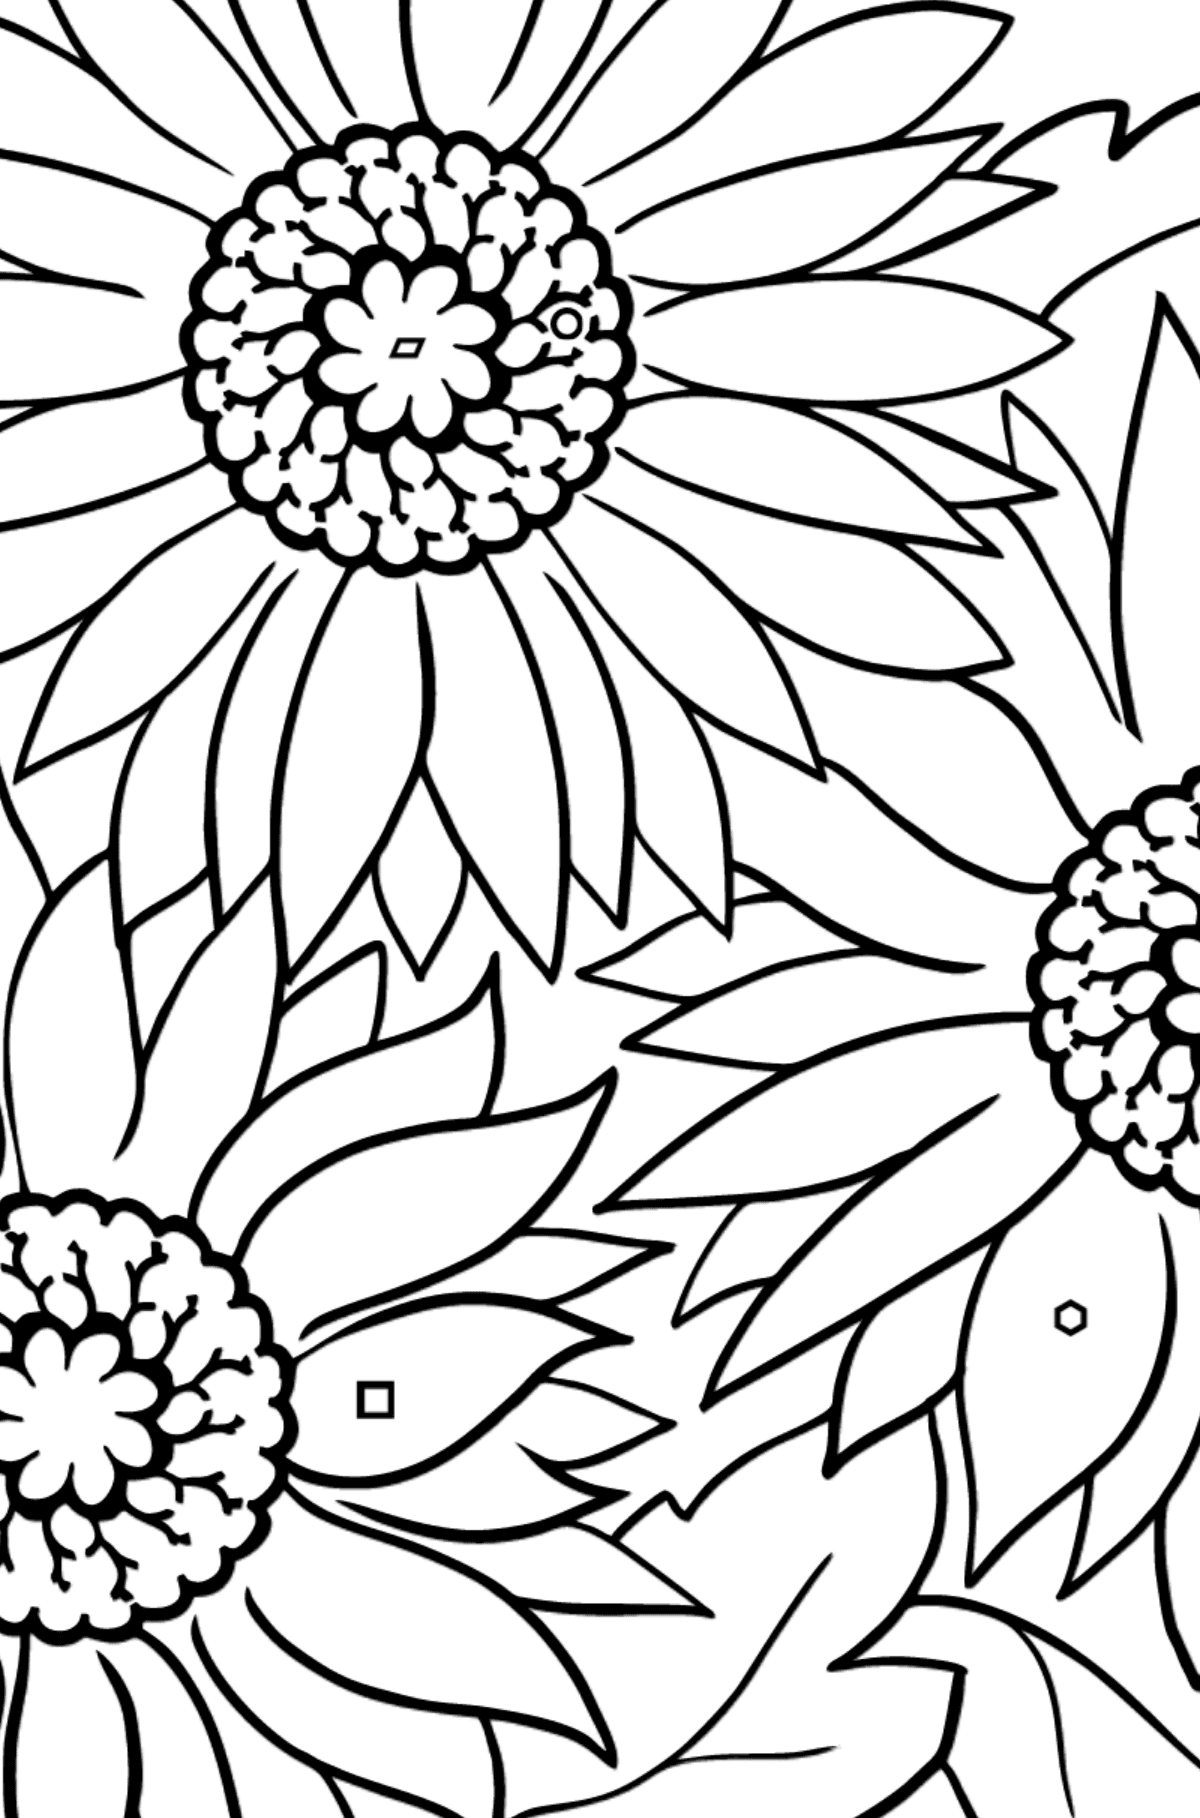 Colouring page Pink Gerbera - Coloring by Geometric Shapes for Kids